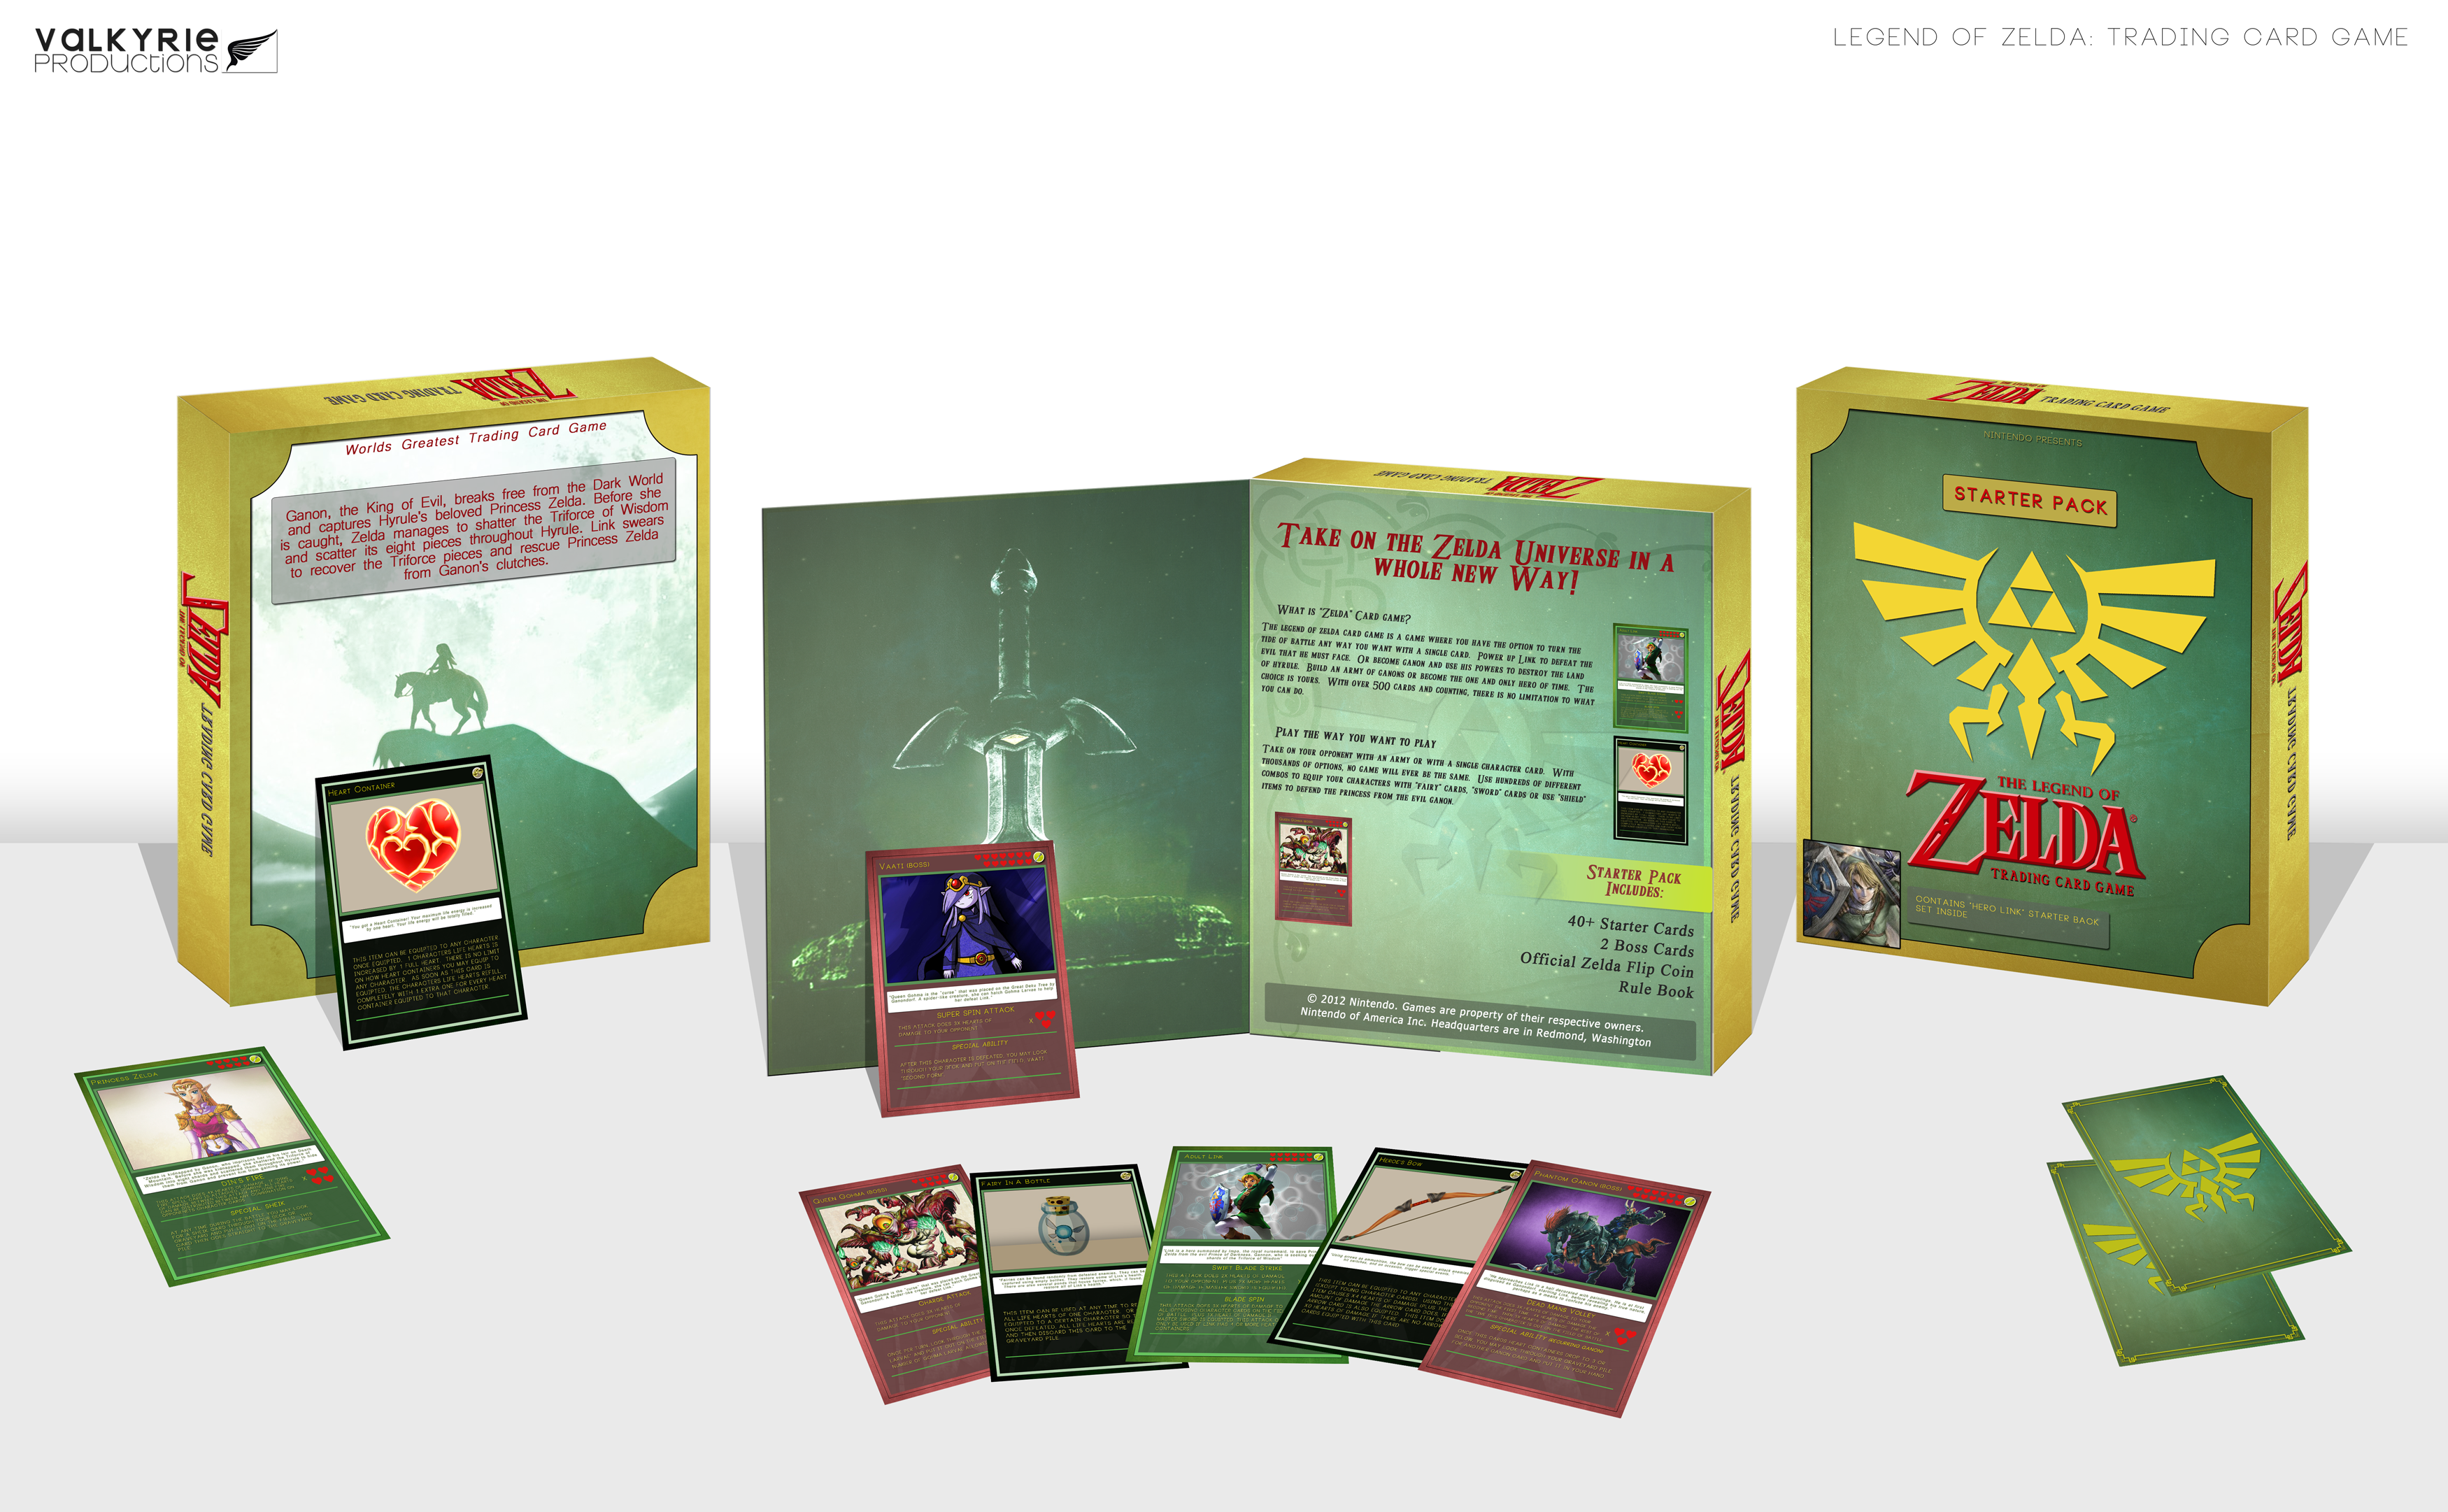 The Legend of Zelda: Trading Card Game box cover